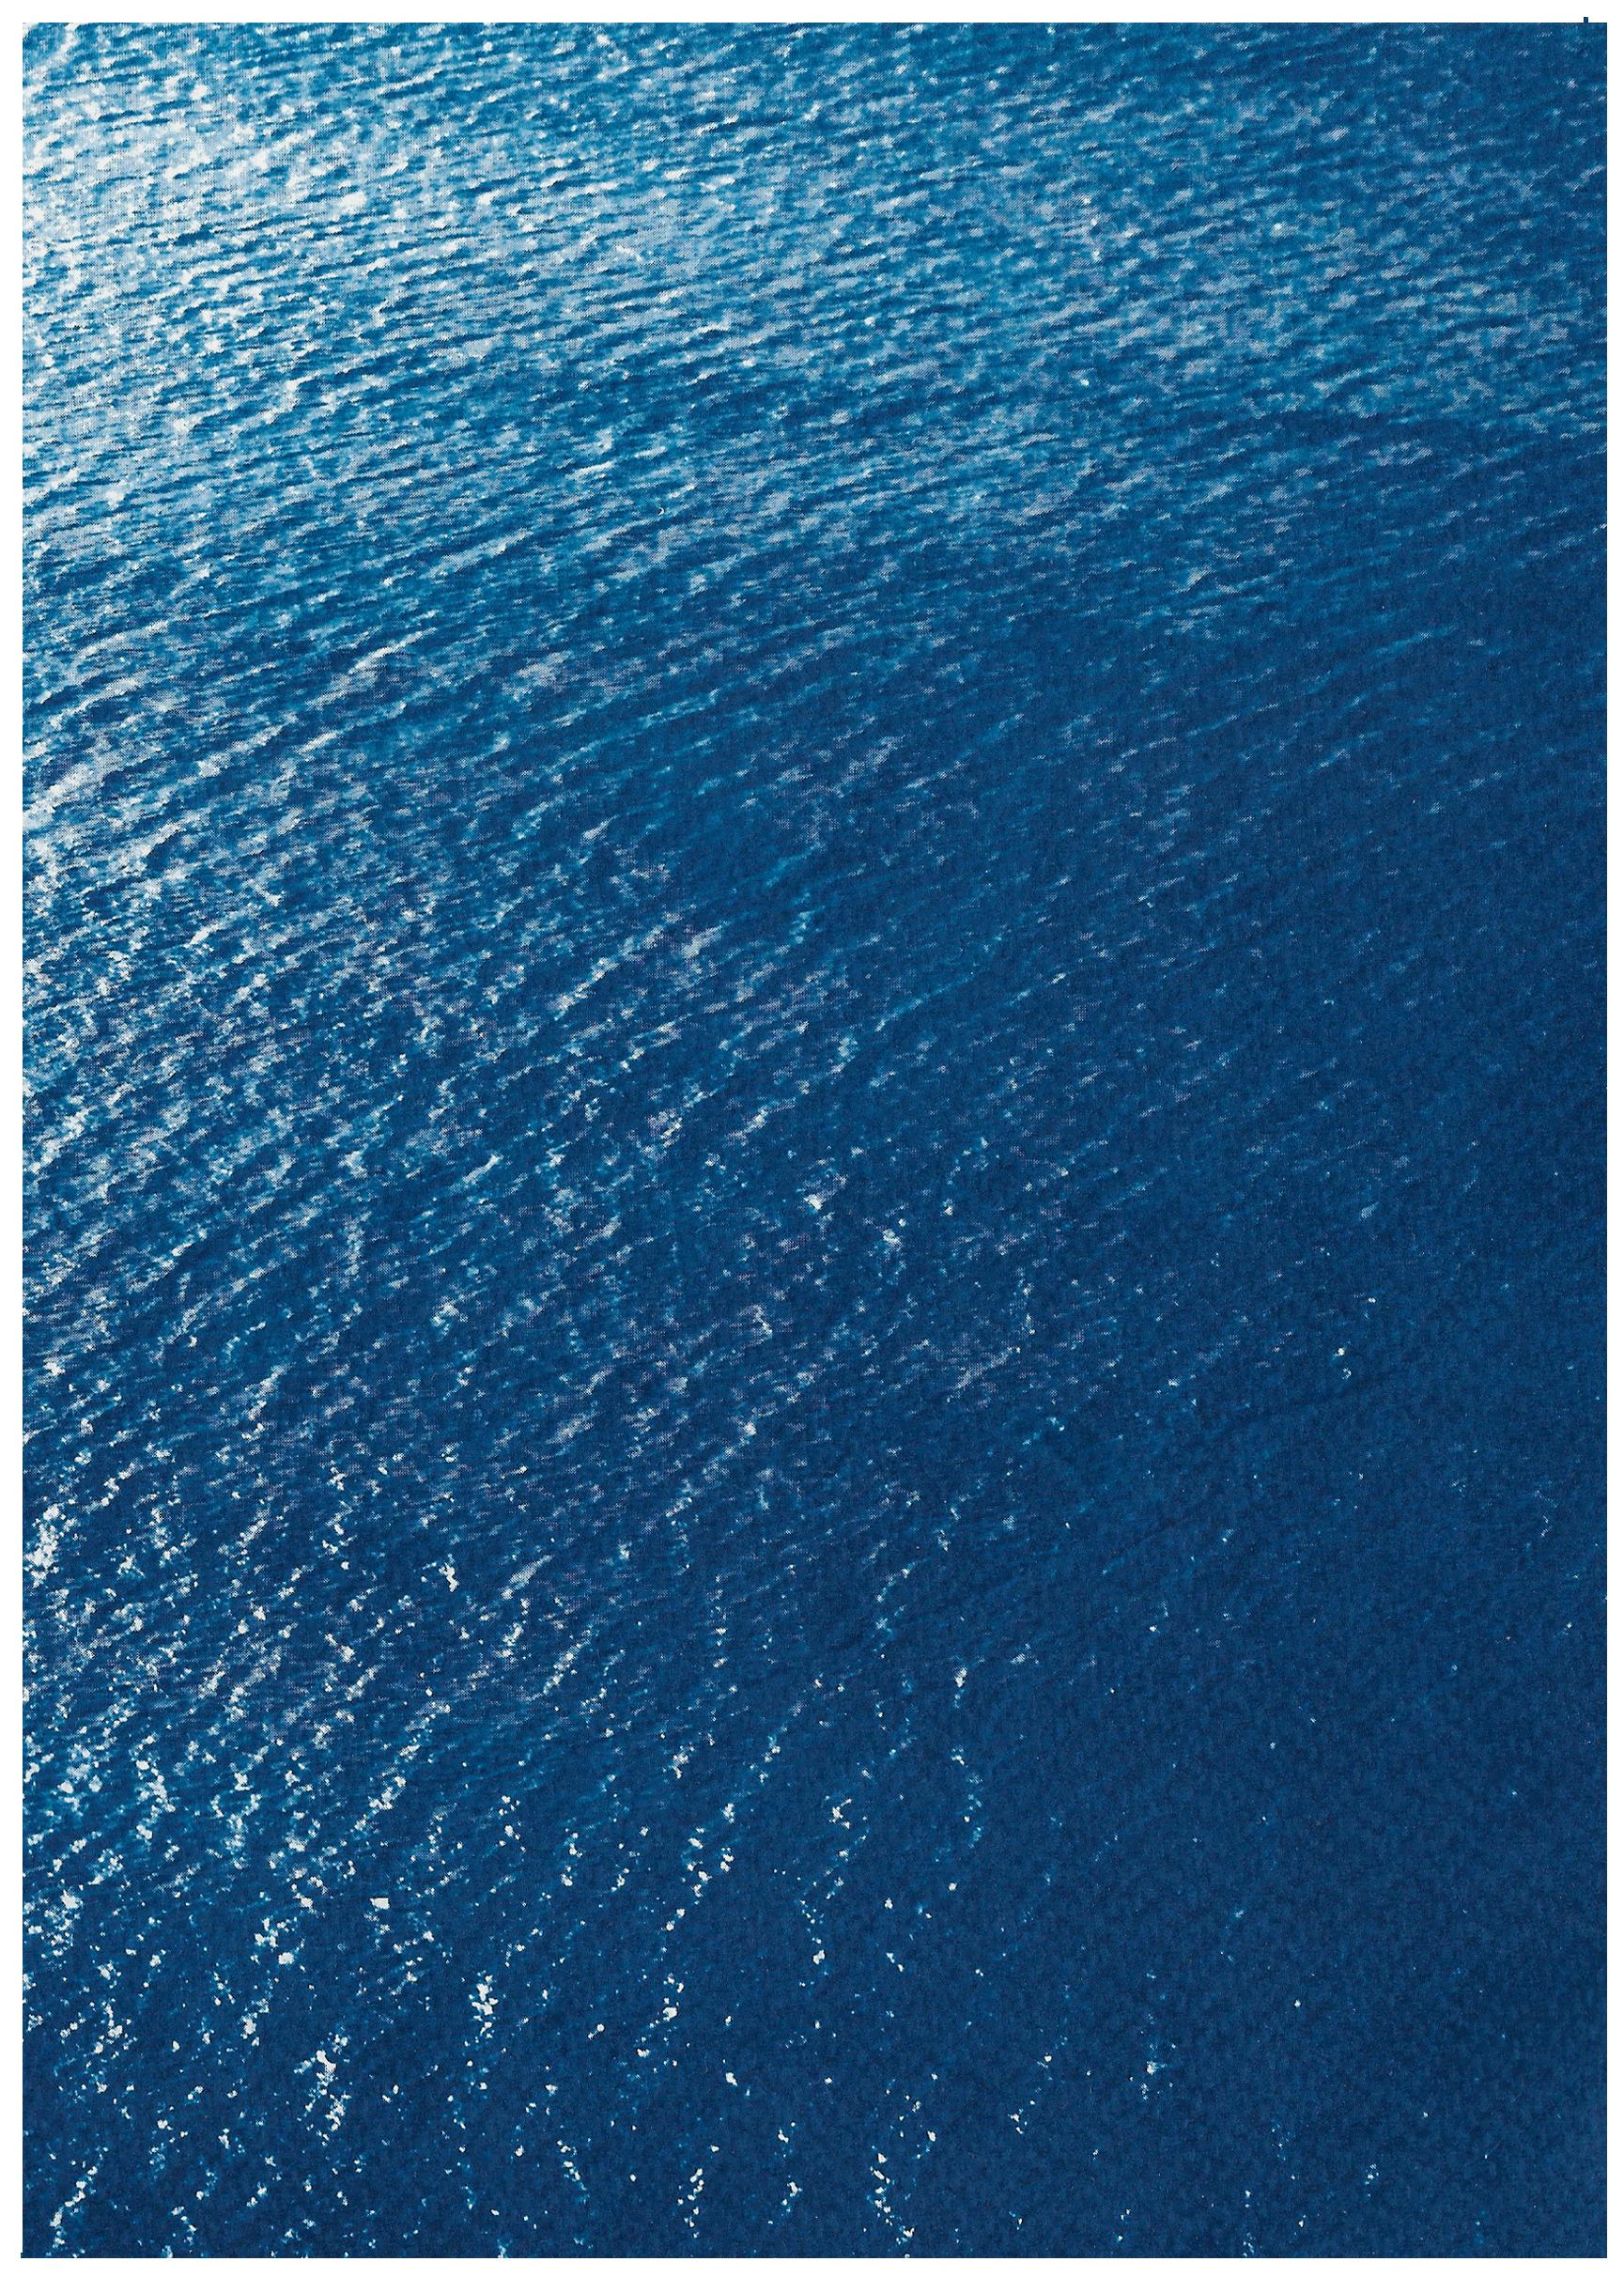 Smooth Bay in the Mediterranean, Classic Blue Diptych, Zen Seascape Coastal Life 1